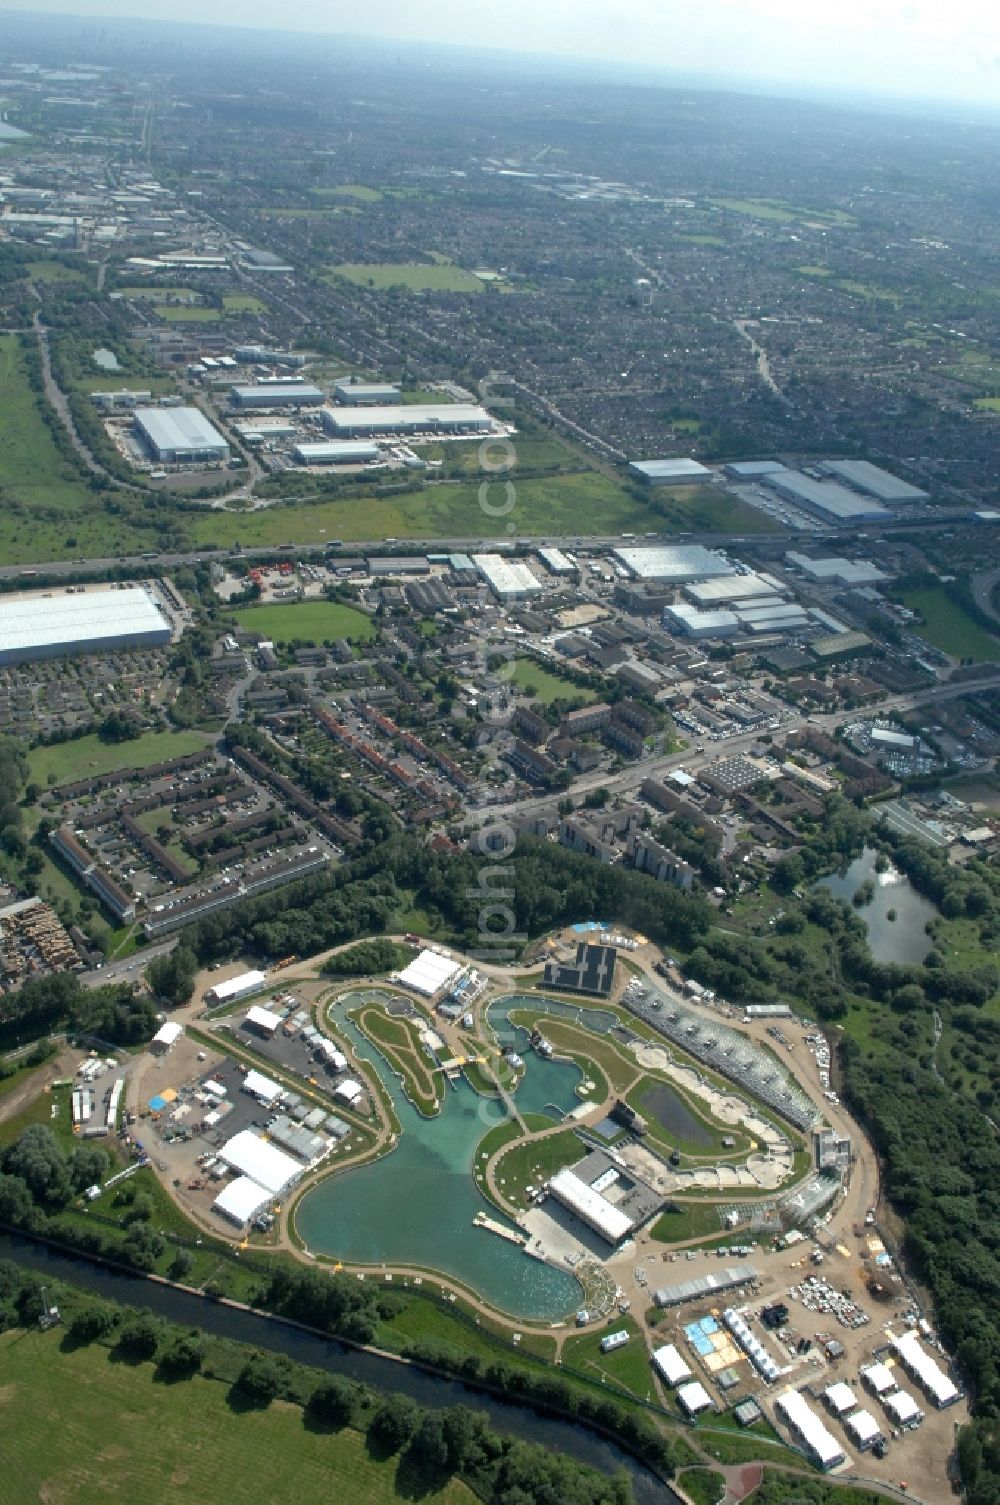 Aerial image Waltham Cross - The canoe slalom park Lee Valley White Water Centre is an Out-of-London venue and located near by Waltham Cross in Hertfordshire and one of the Olympic and Paralympic venues for the 2012 Games in Great Britain